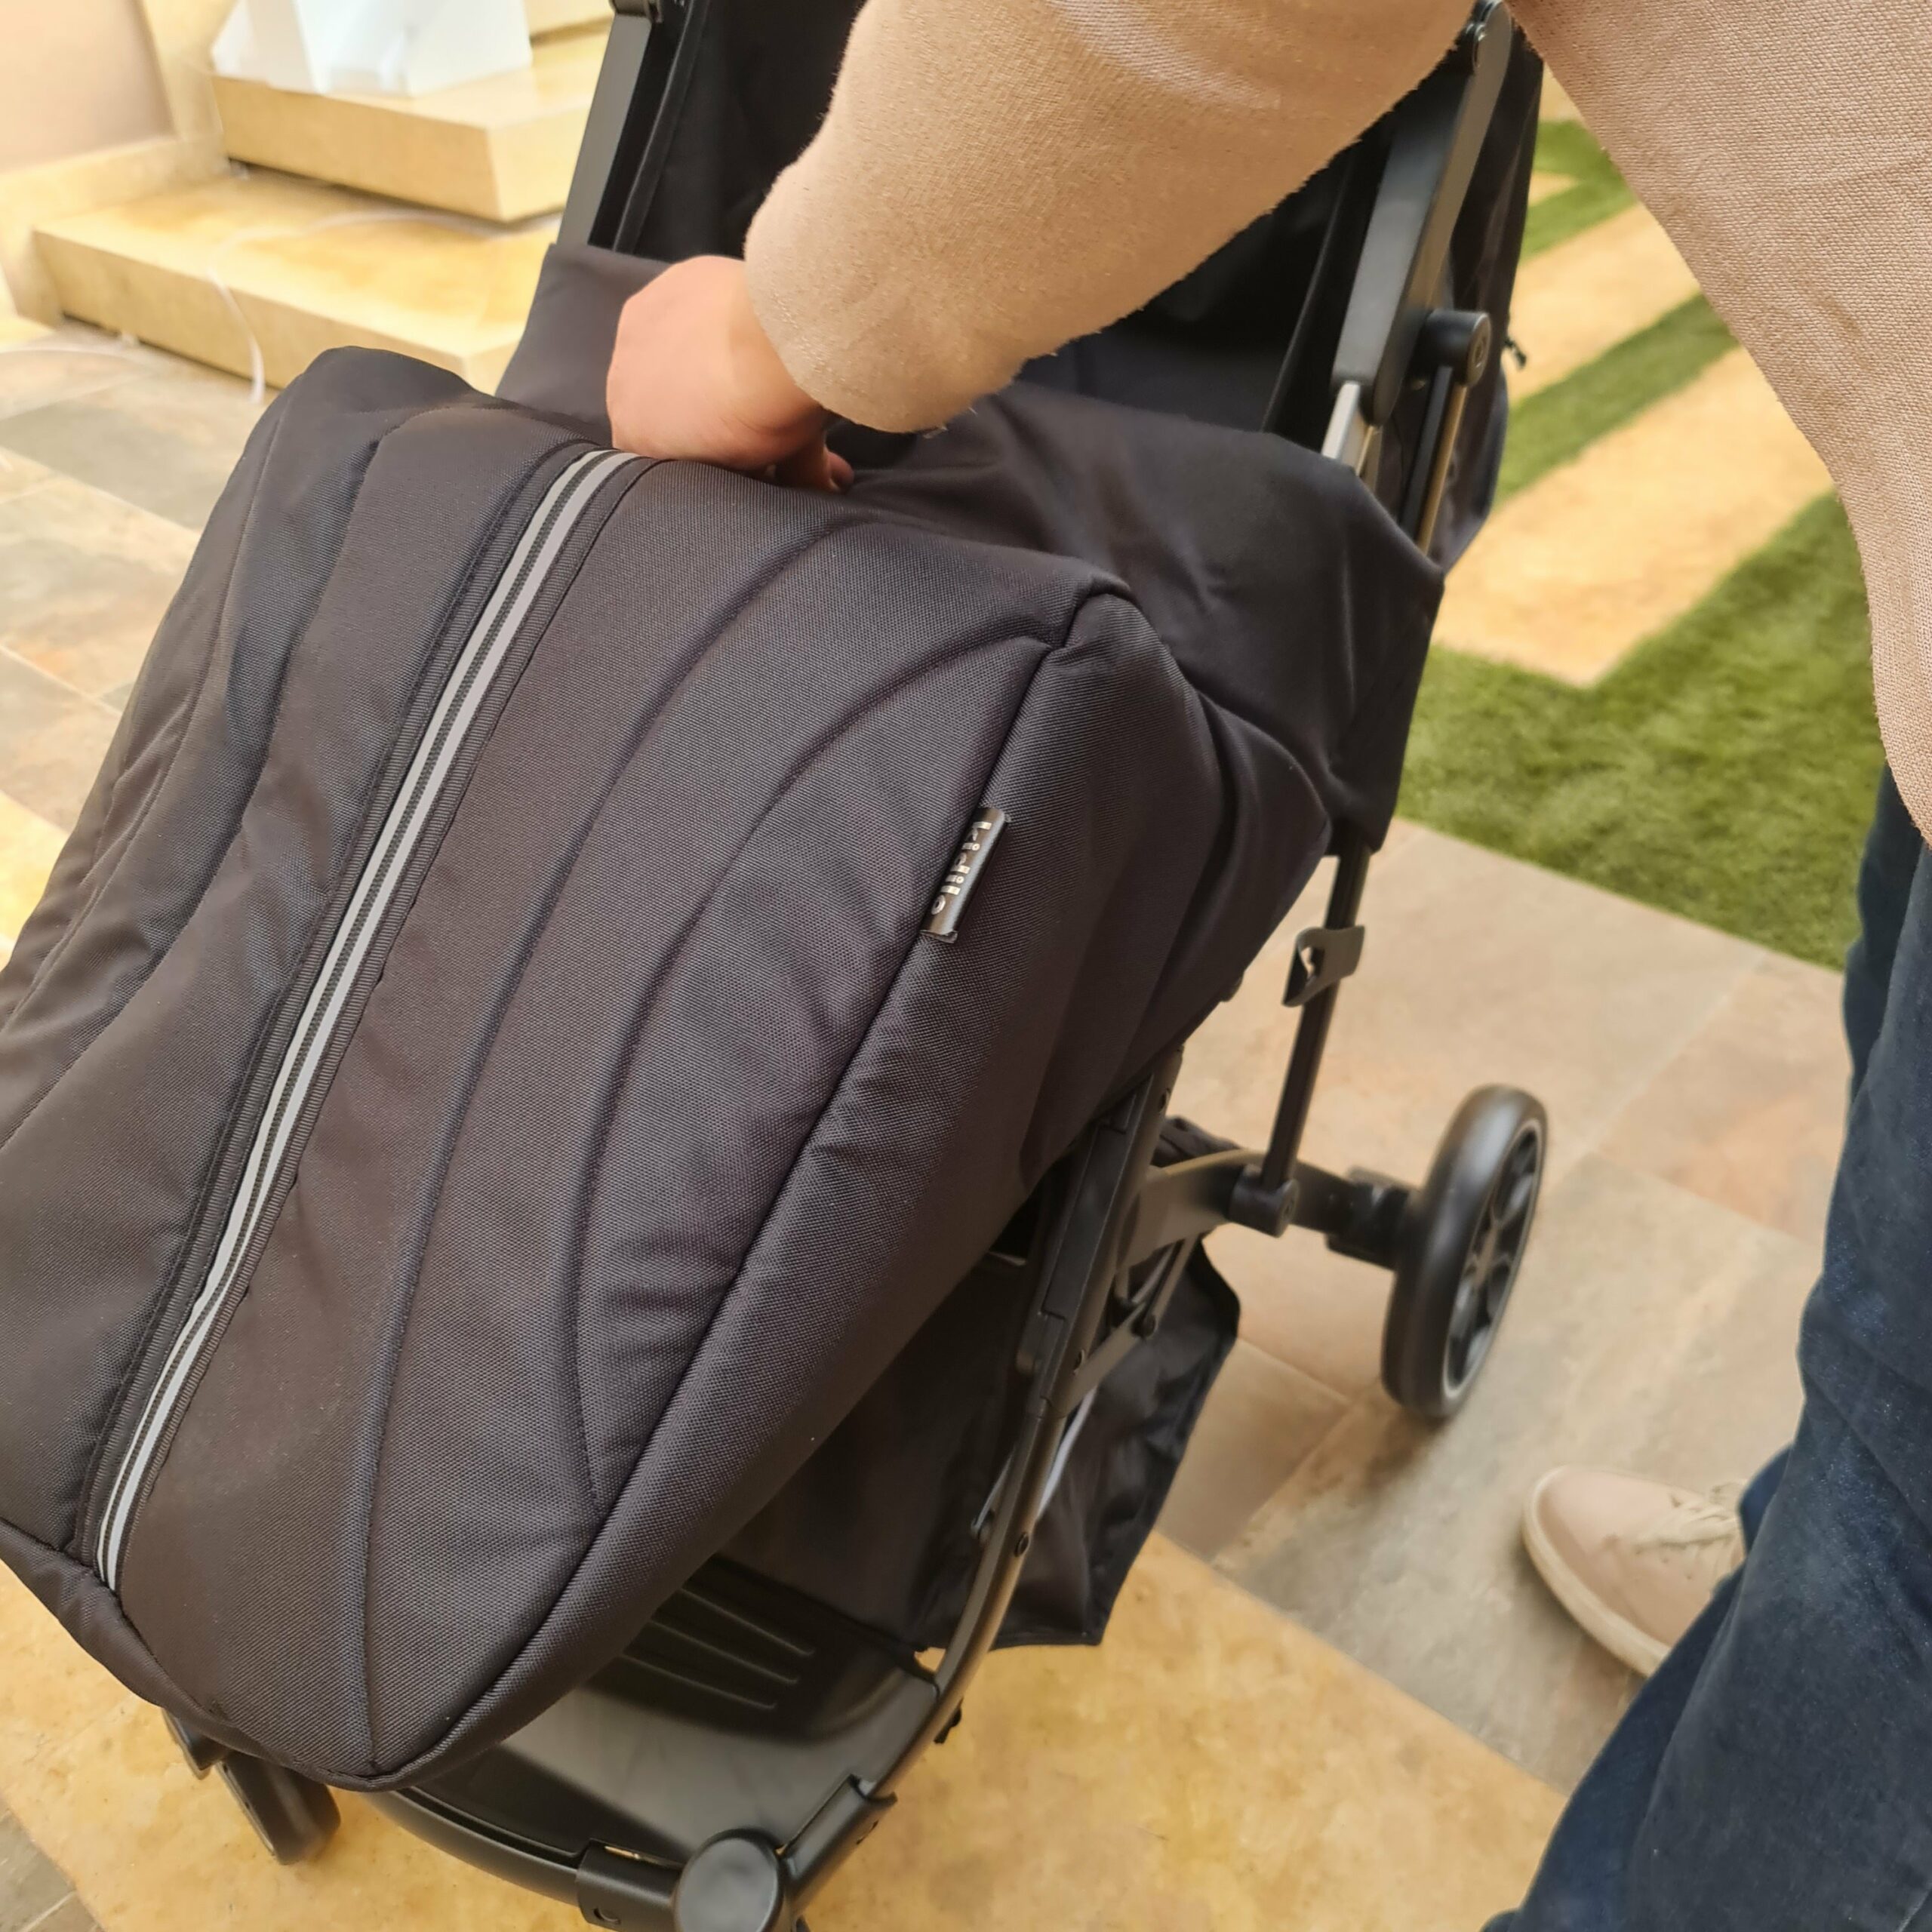 Poussette valise deluxe + Couvre jambe